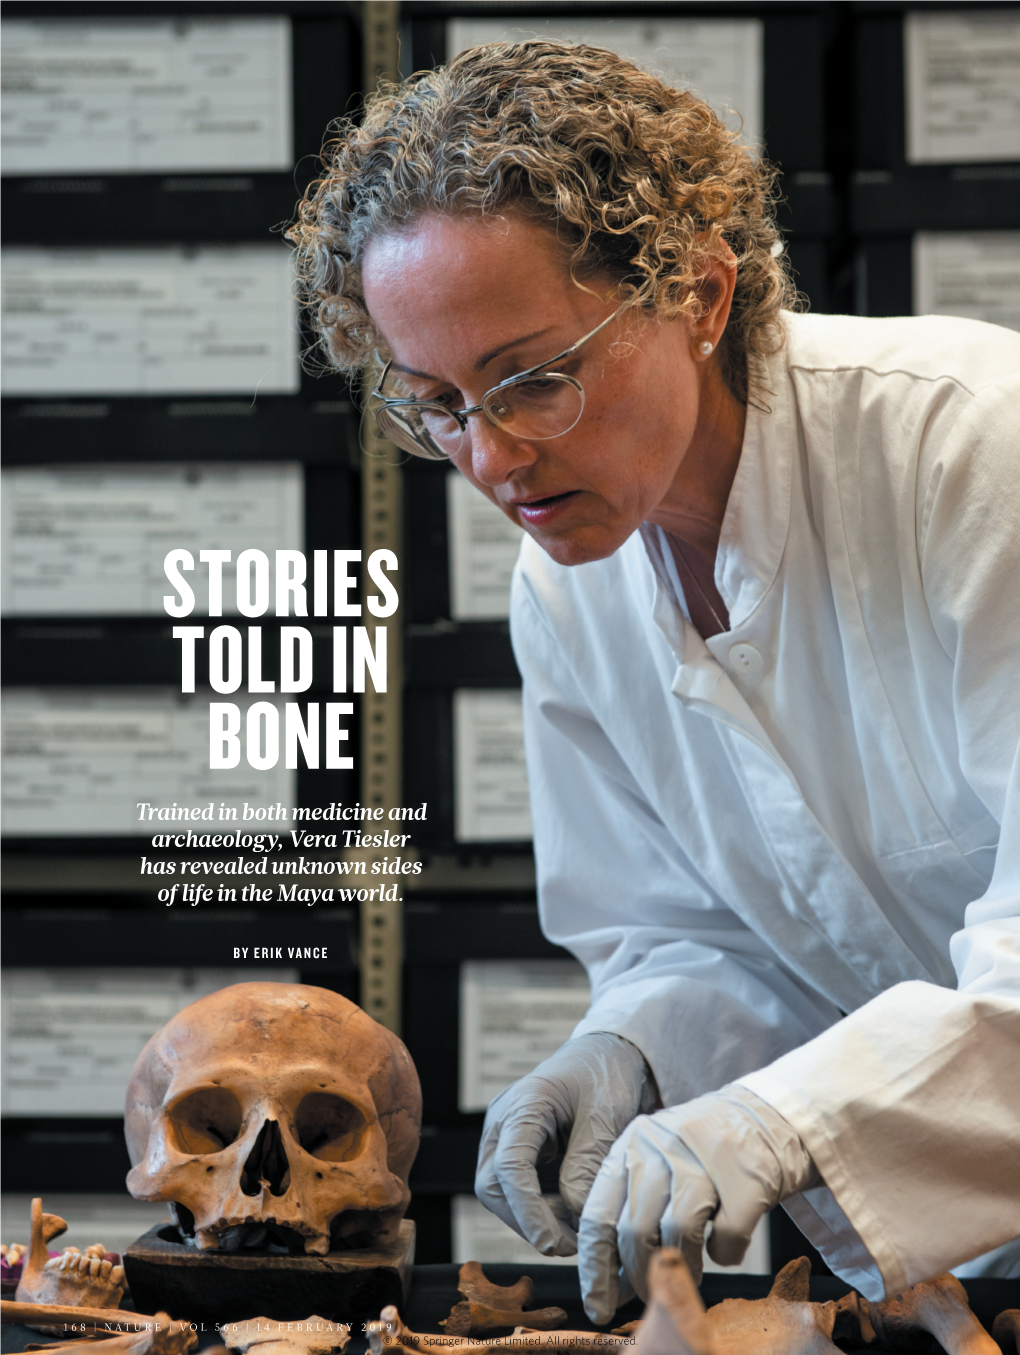 STORIES TOLD in BONE Trained in Both Medicine and Archaeology, Vera Tiesler Has Revealed Unknown Sides of Life in the Maya World